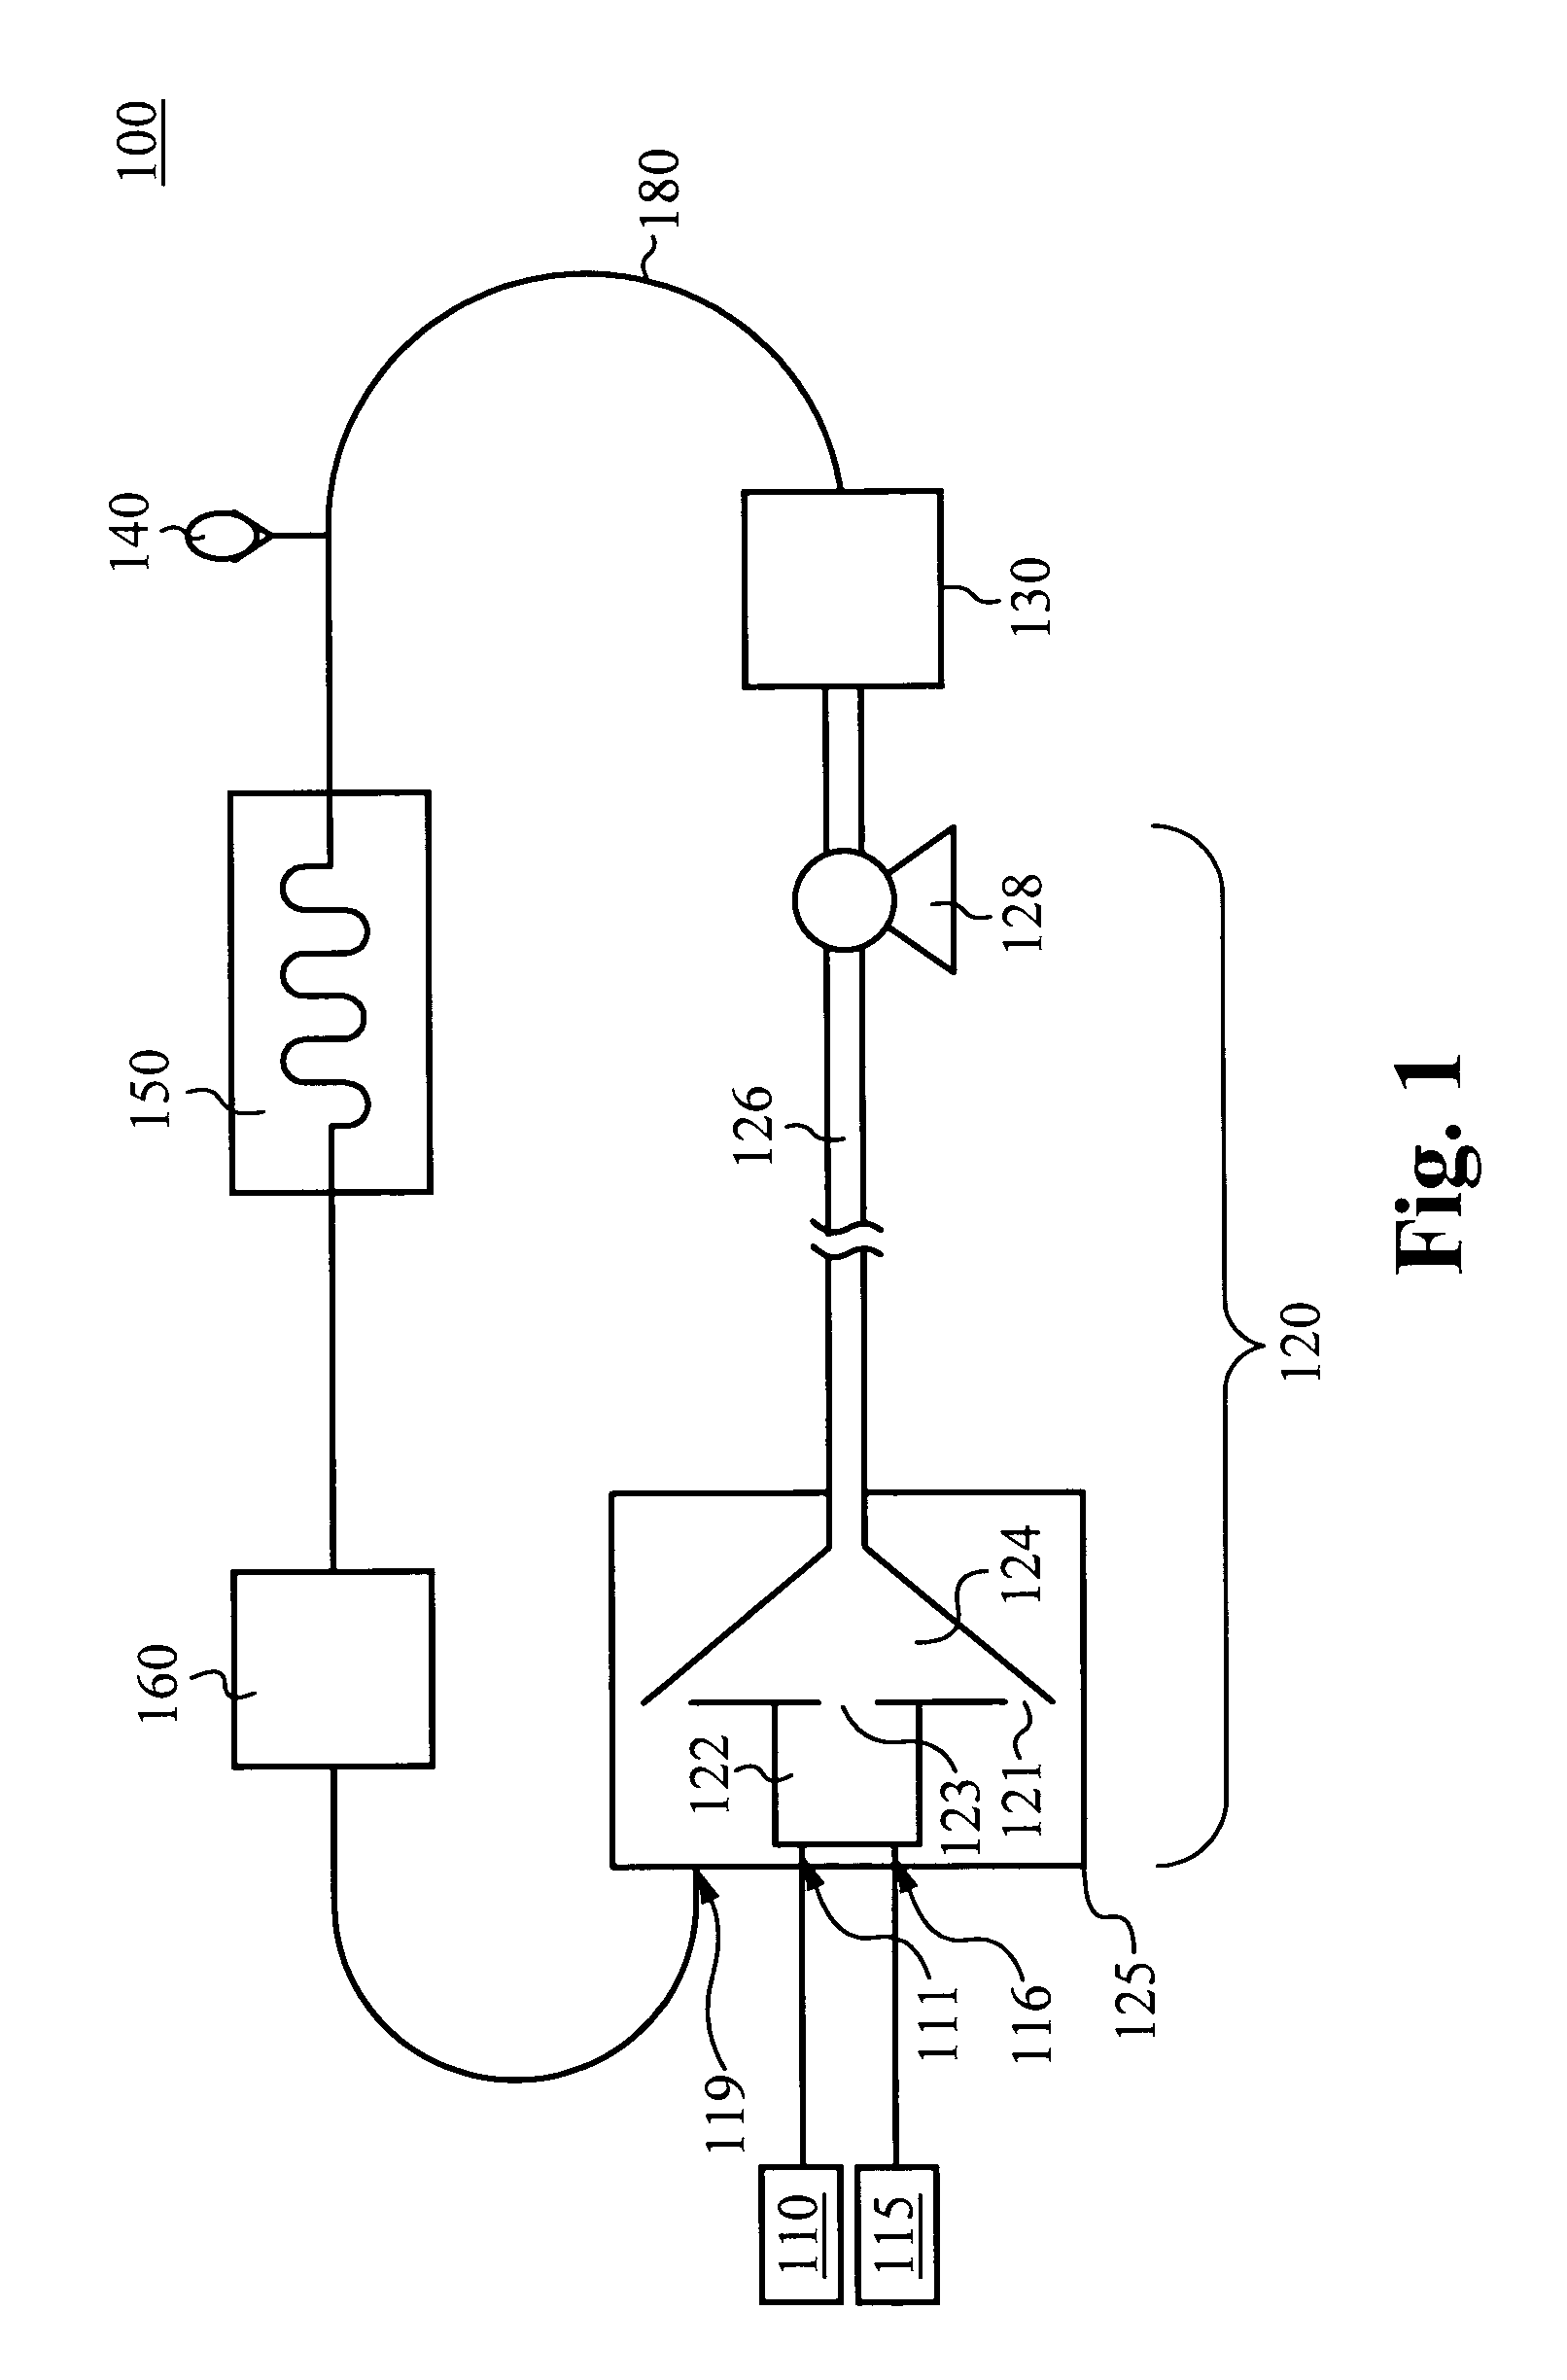 Fluid recirculation system for use in vapor phase particle production system